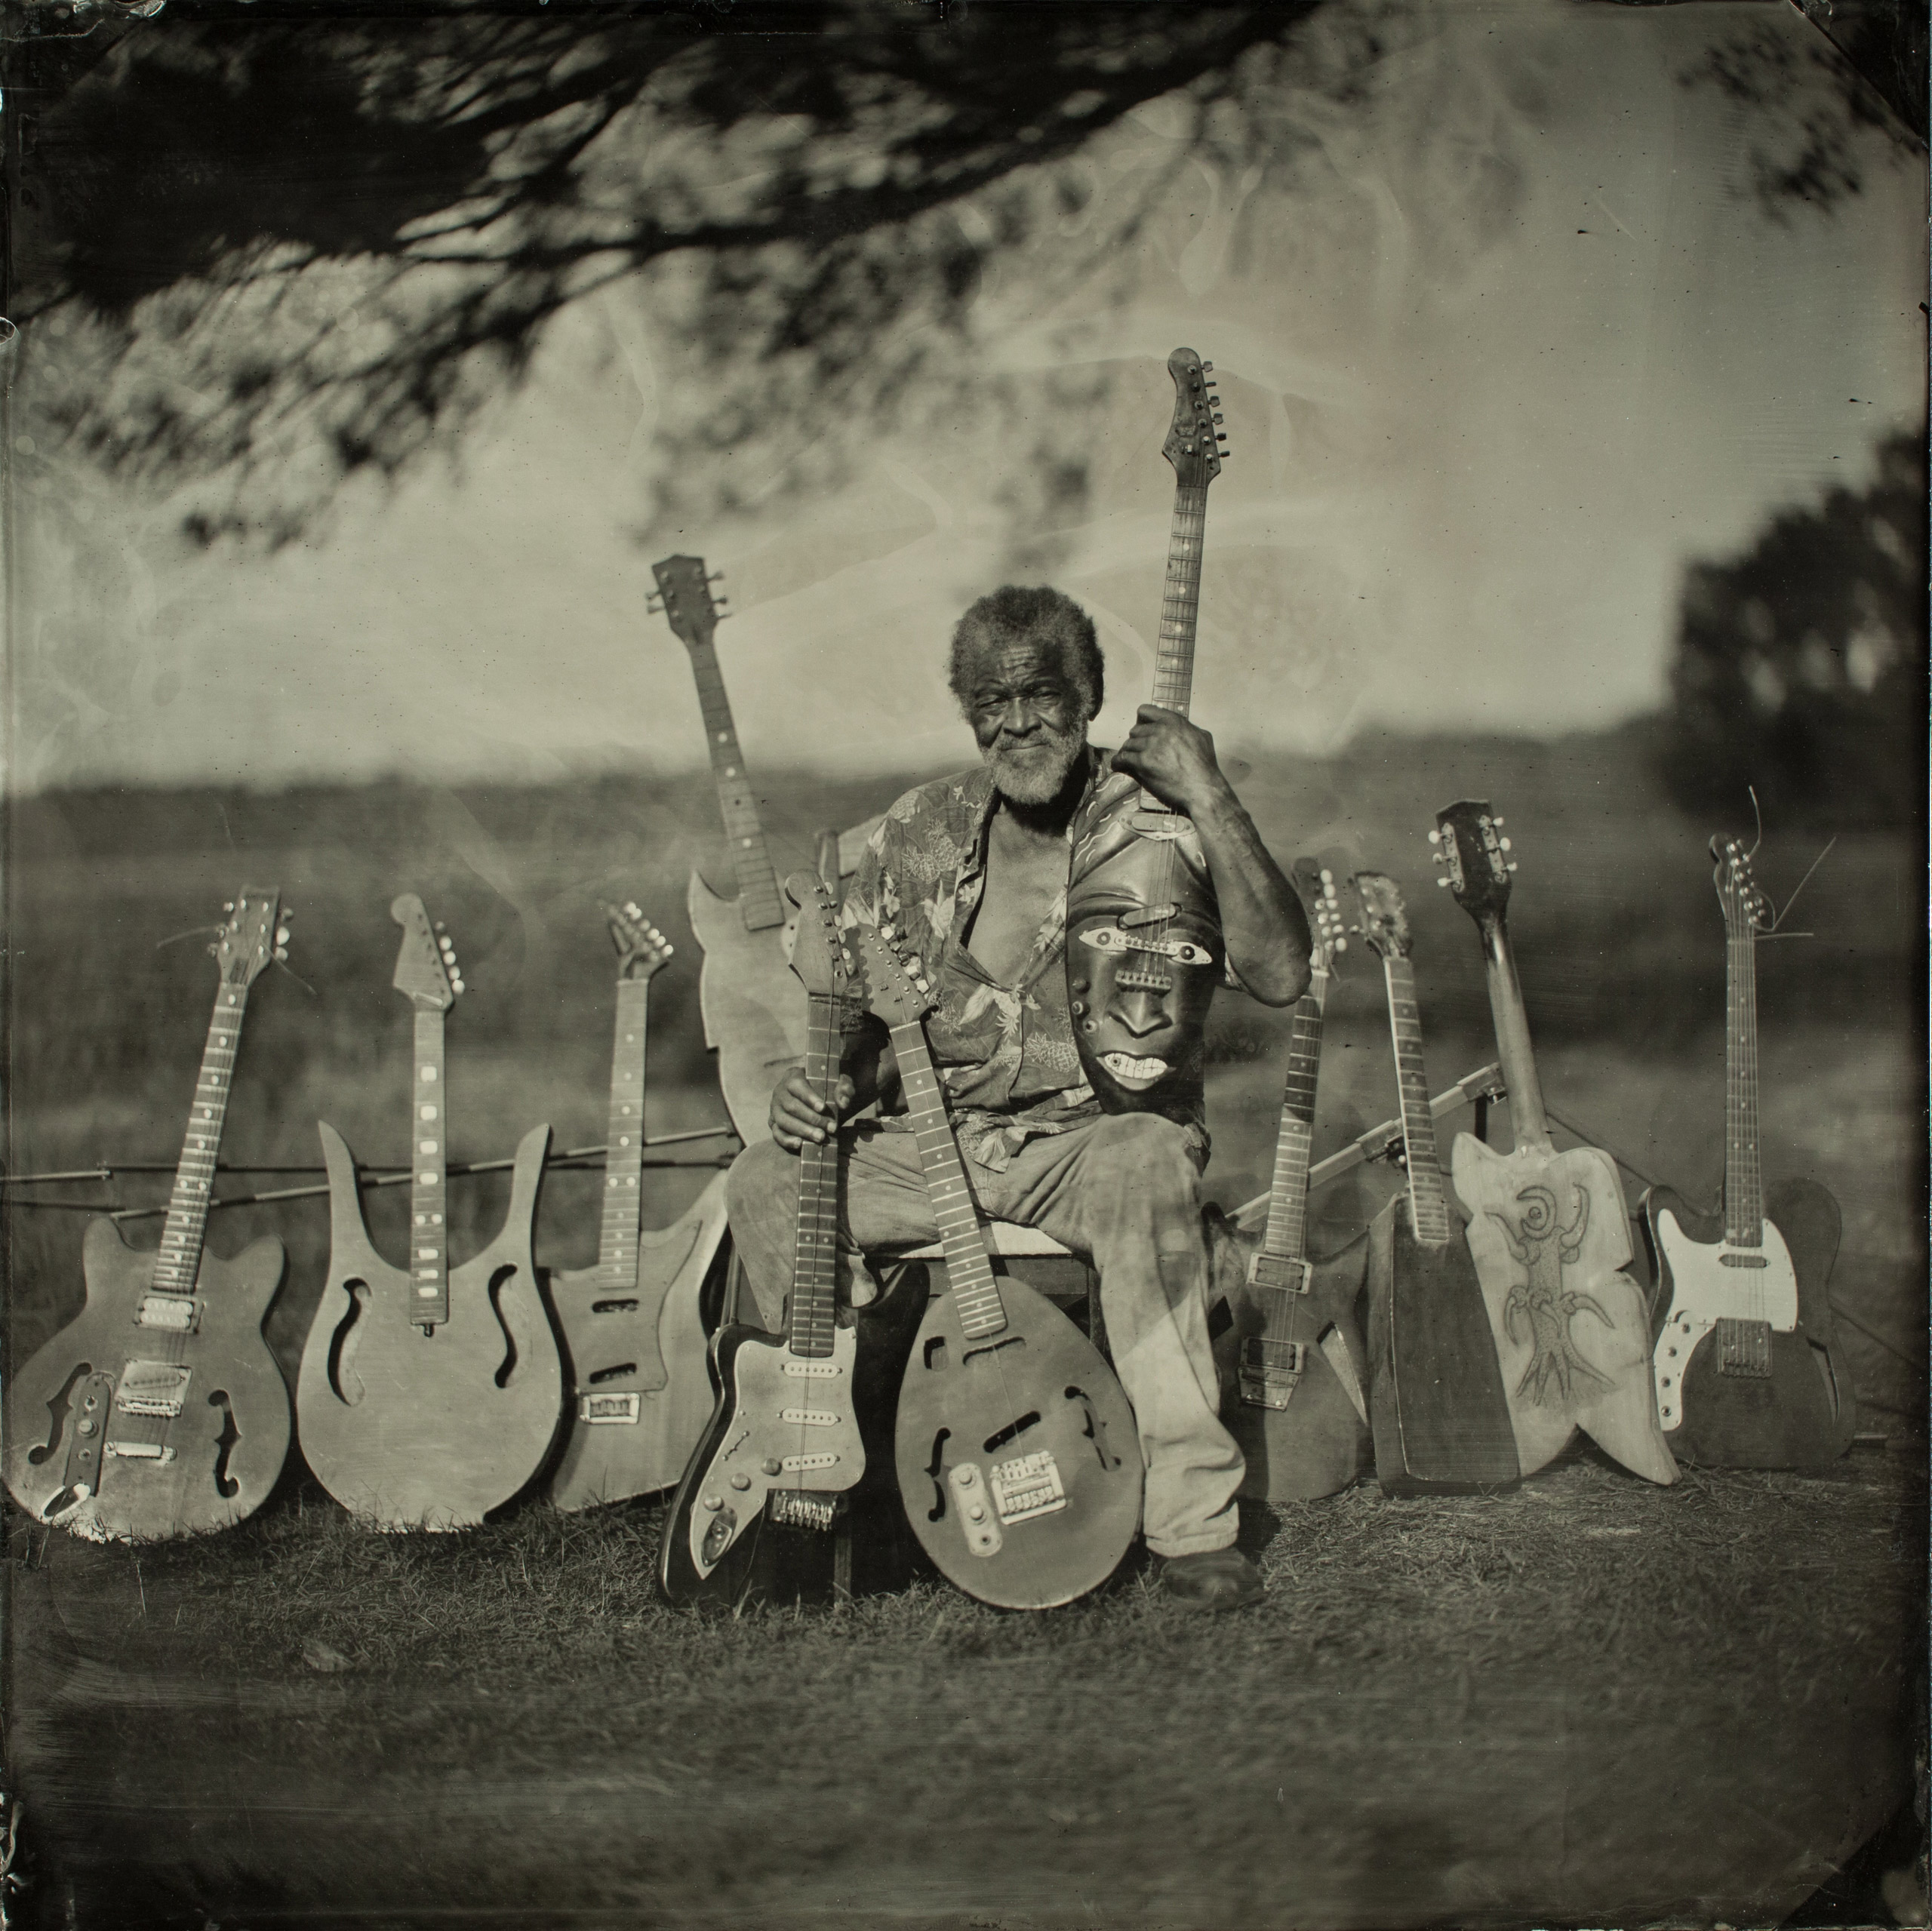 Freeman Vines, Luthier Wilson, NC 2015. Tintype. (Wet Plate Collodion Photographs by Tim Duffy)